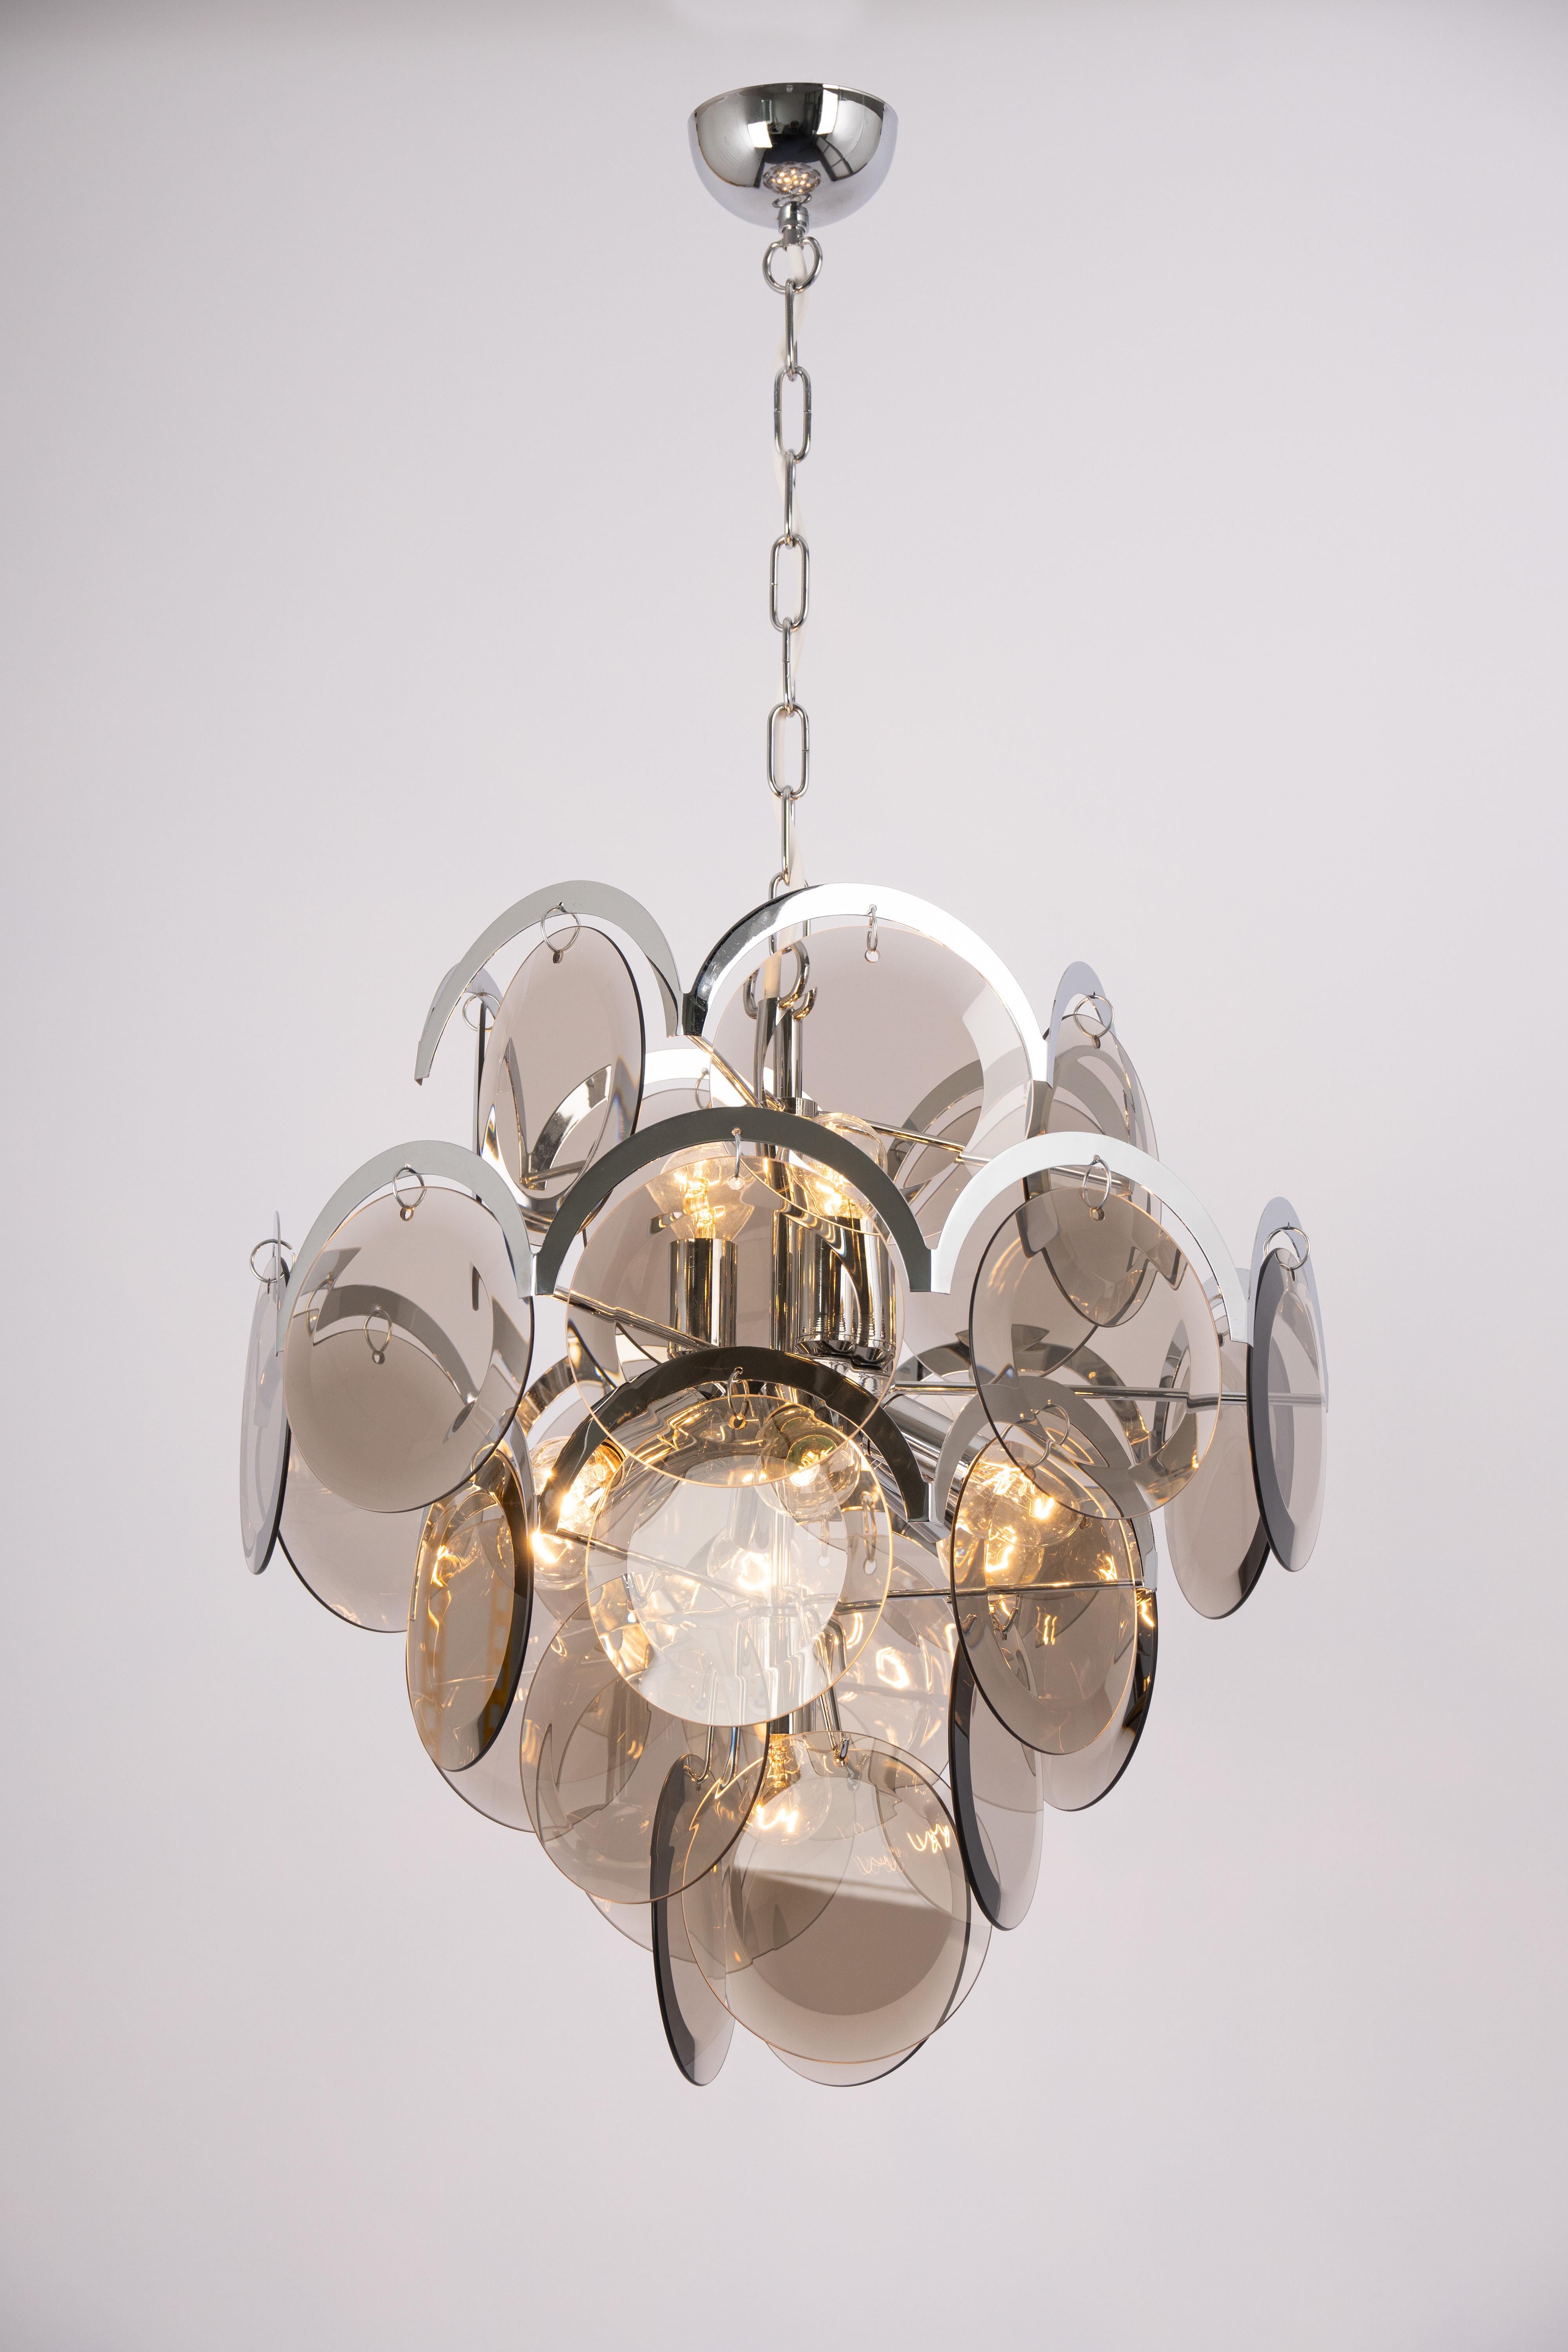 Vistosi Smoked Glass Disc Chrome Chandelier, Italy, 1970s For Sale 4